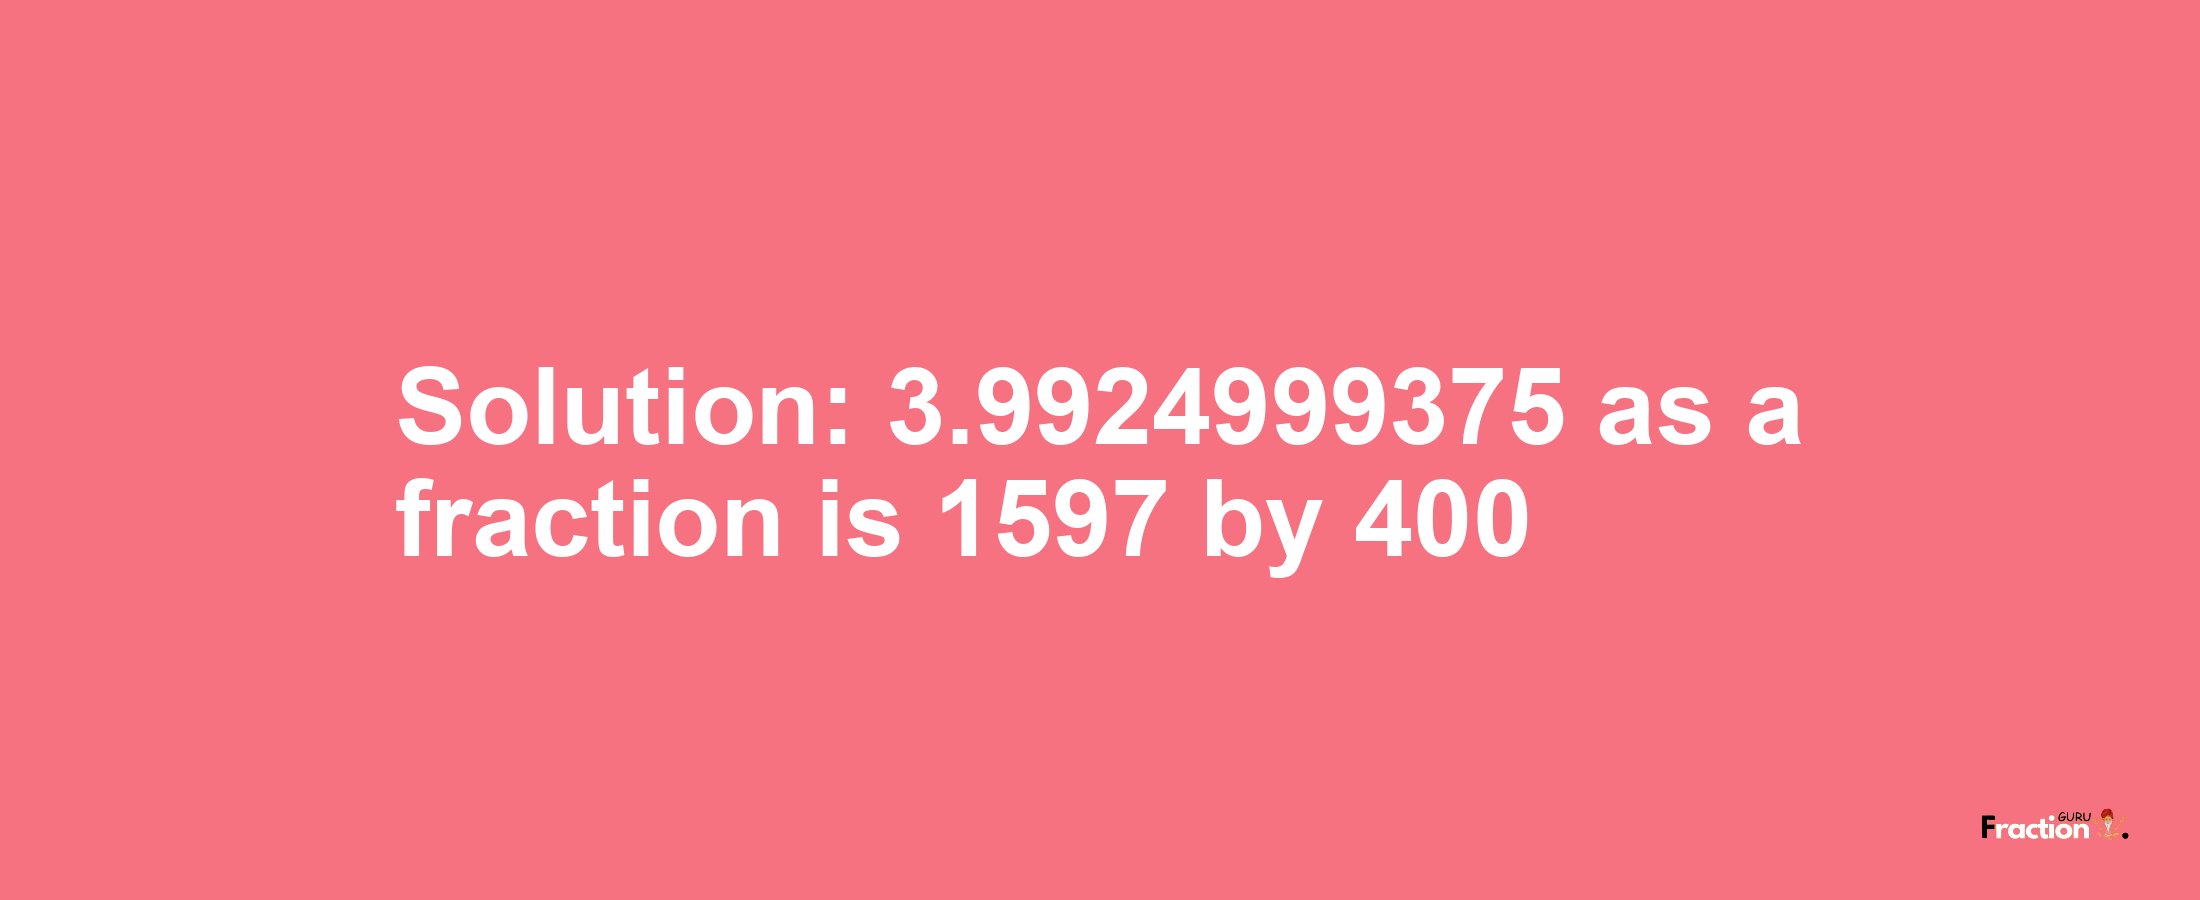 Solution:3.9924999375 as a fraction is 1597/400